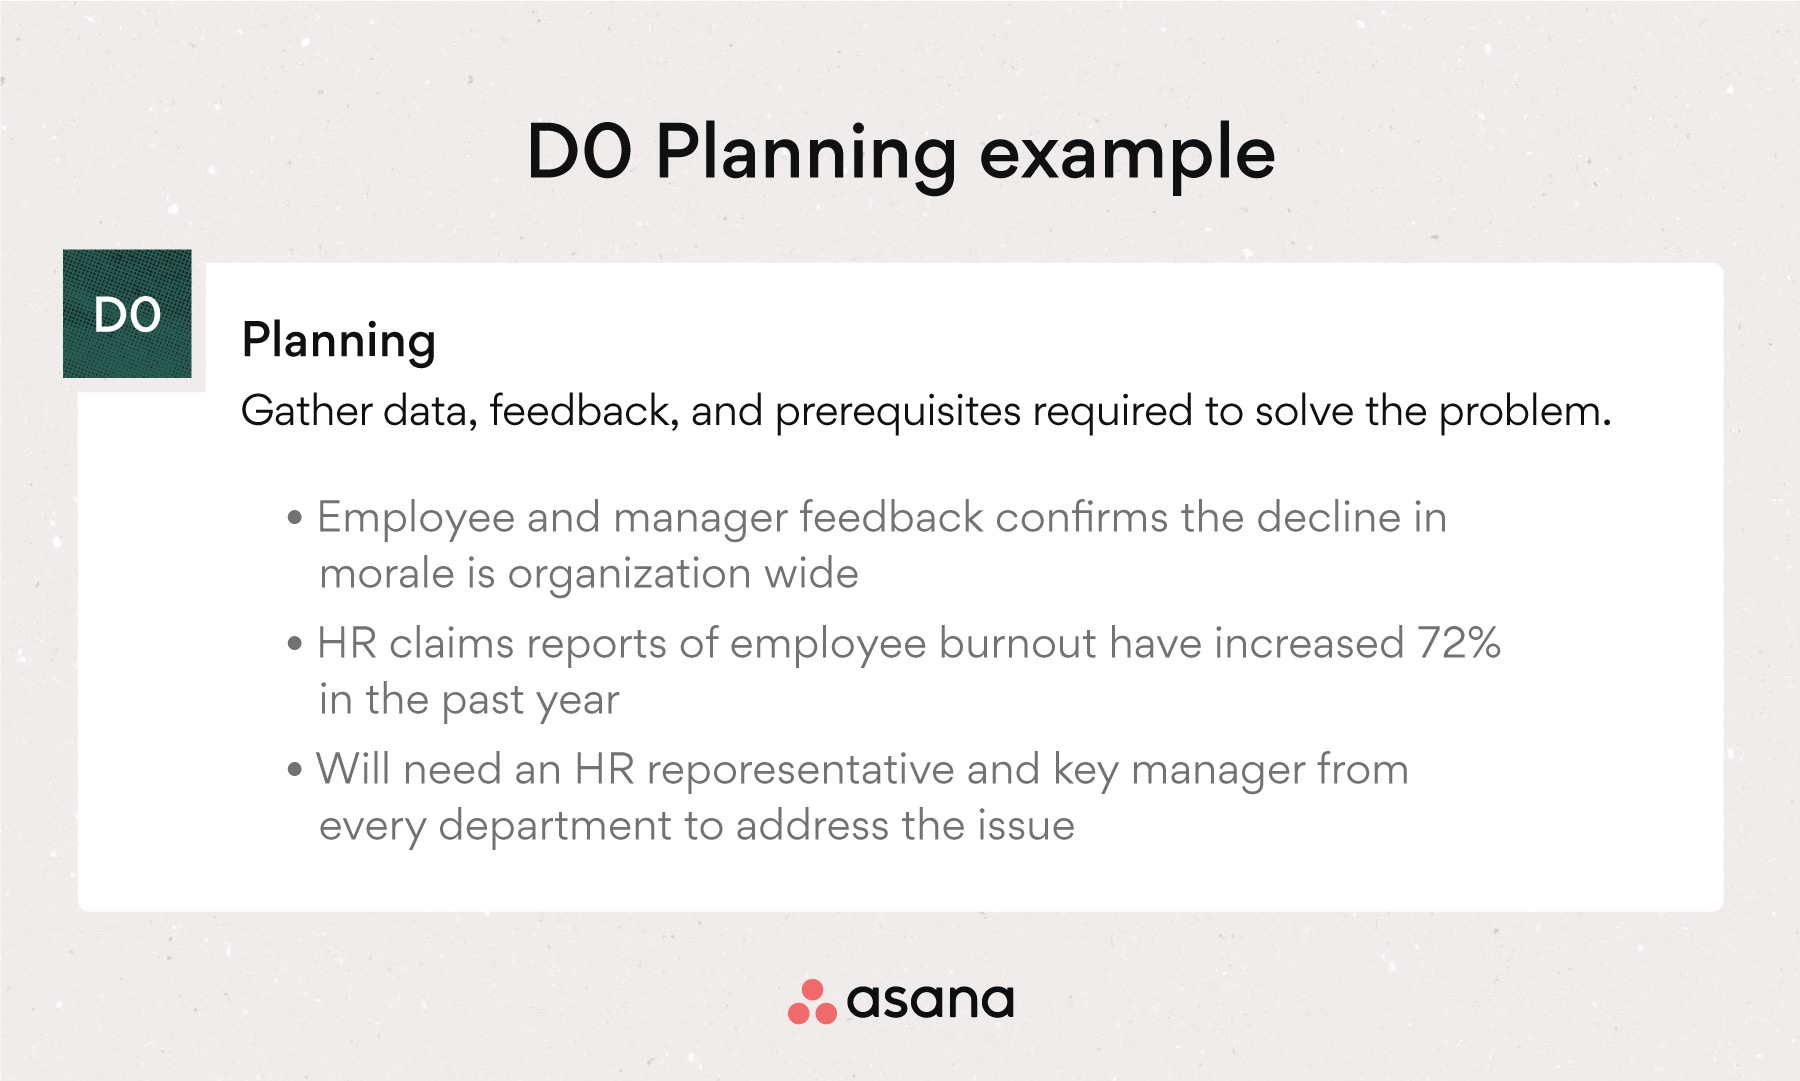 D0 Planning example